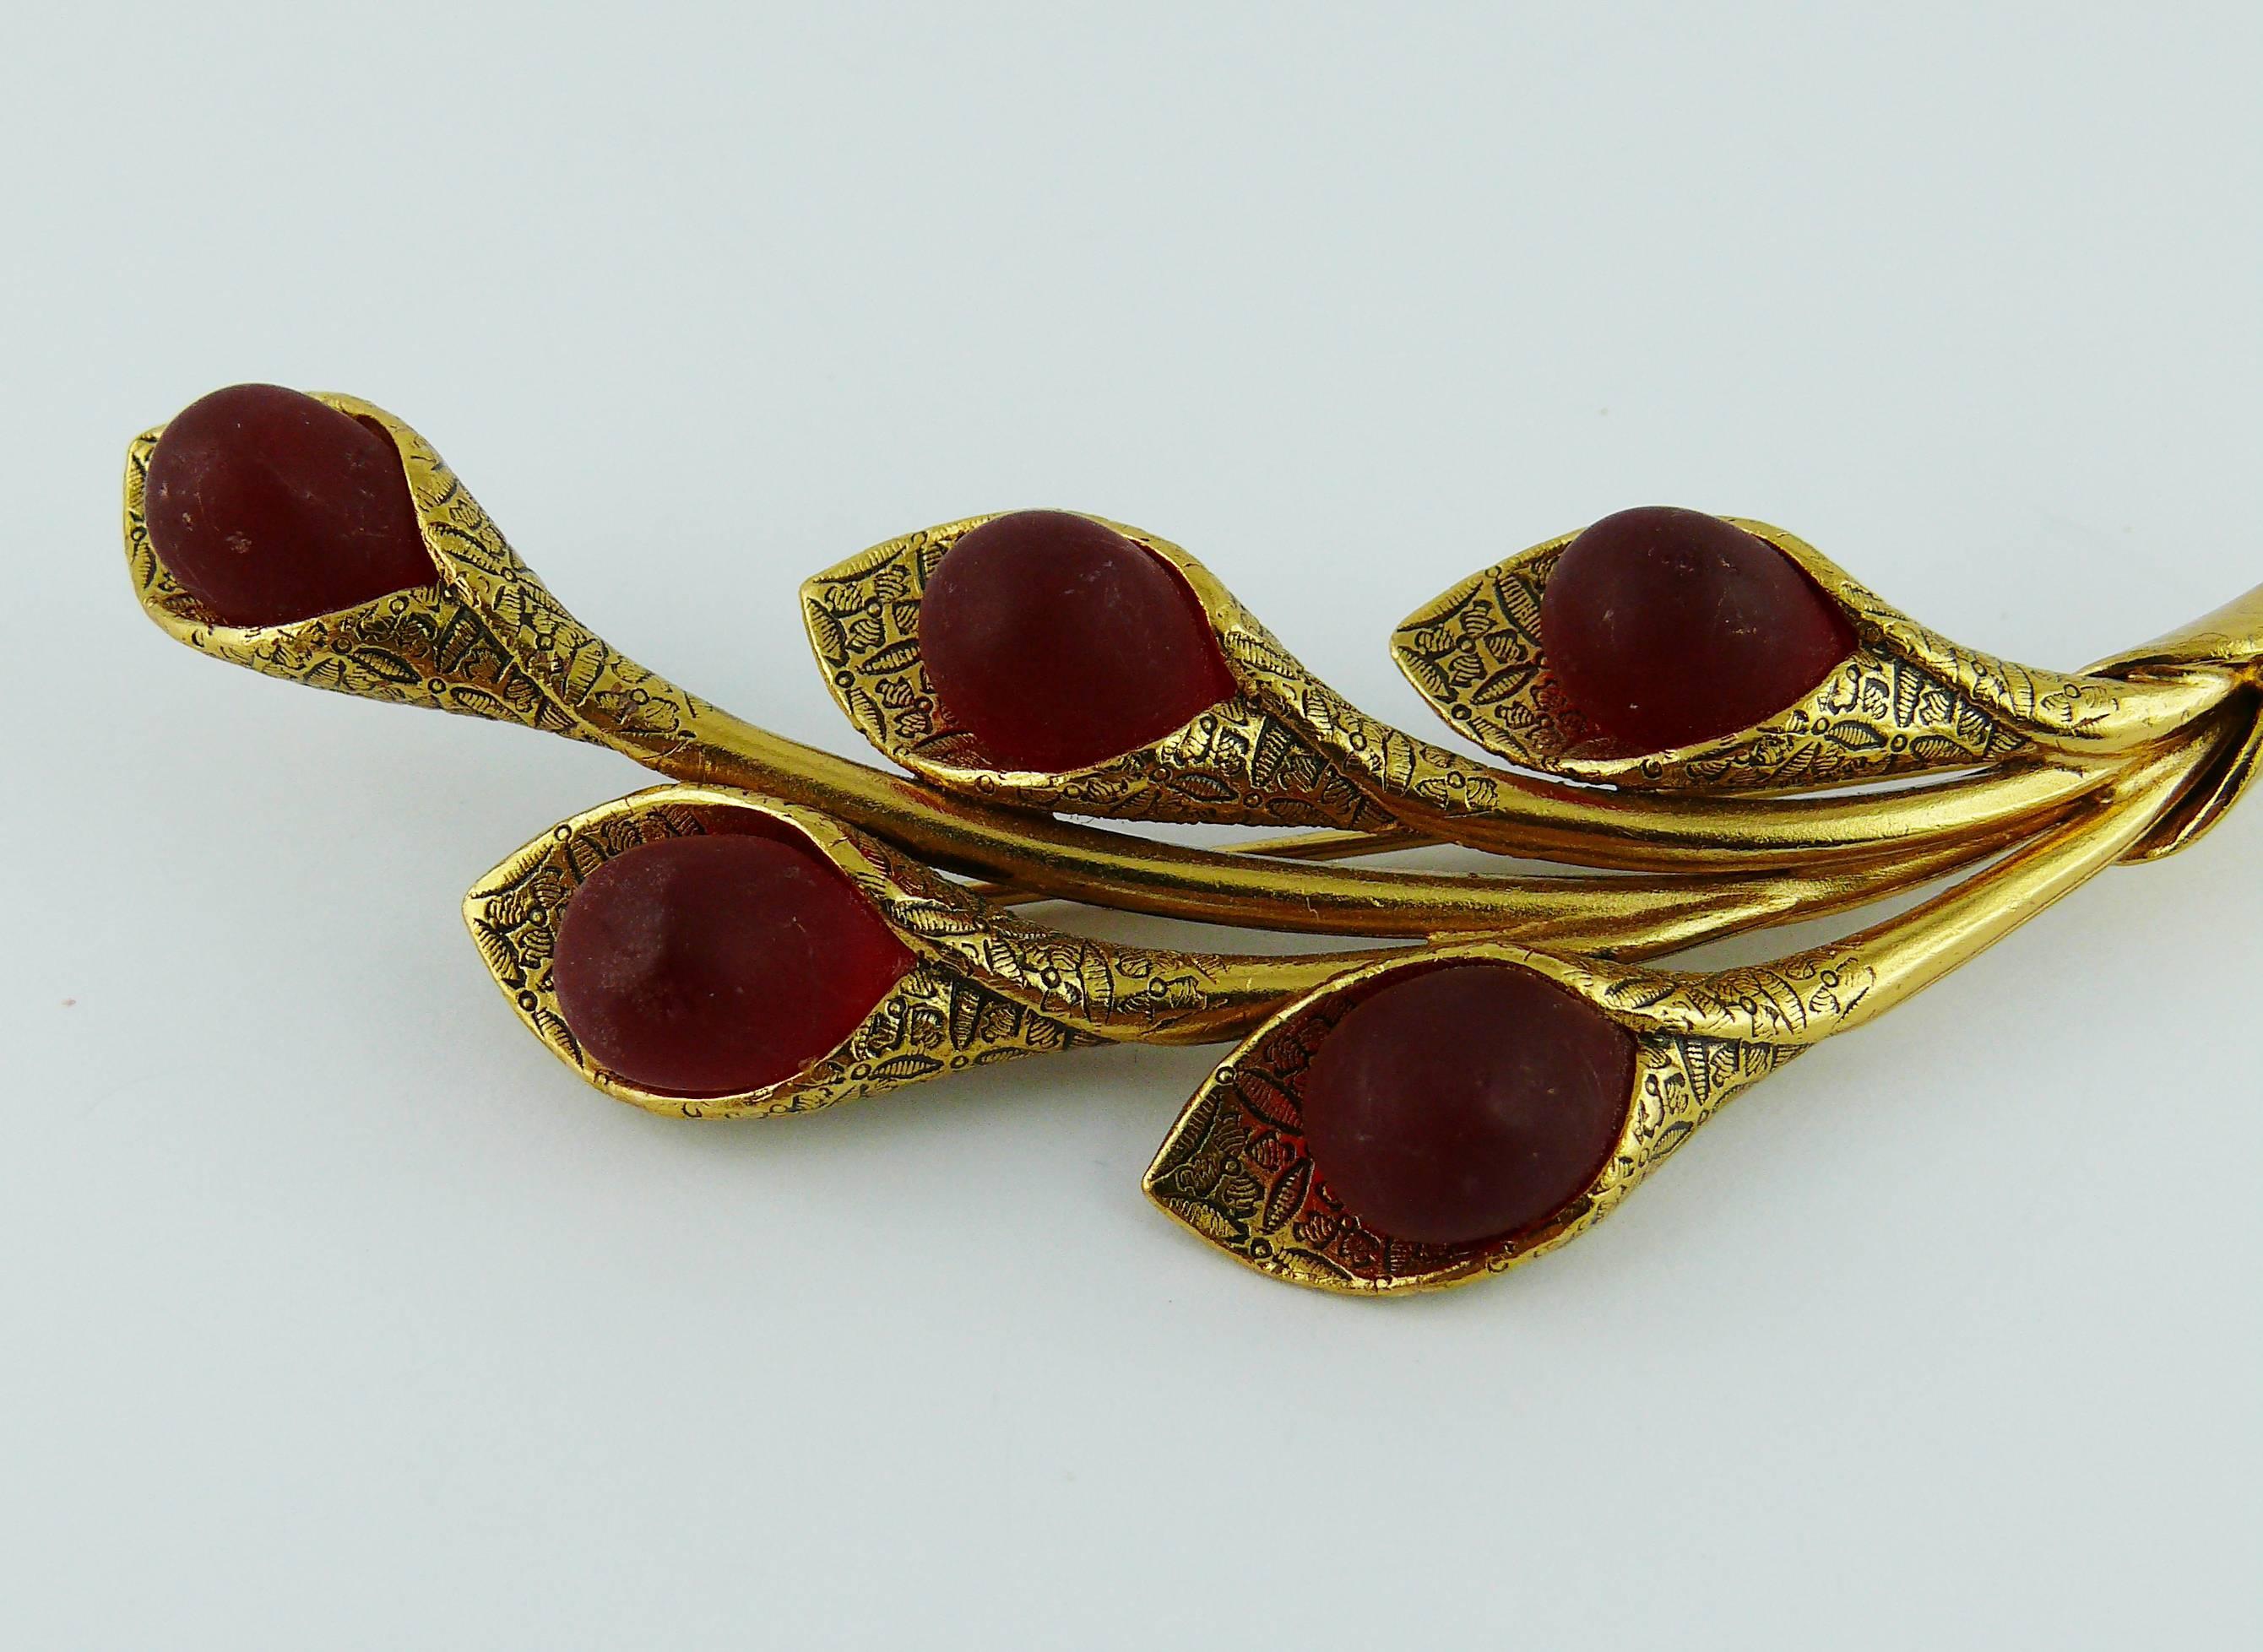 KENZO vintage gold tone floral brooch embellished with red glass cabochons.

Marked KENZO Paris Made in France.

Indicative measurements : length approx. 10.5 cm (4.13 inches) / width approx. 3 cm (1.18 inches).

JEWELRY CONDITION CHART
- New or